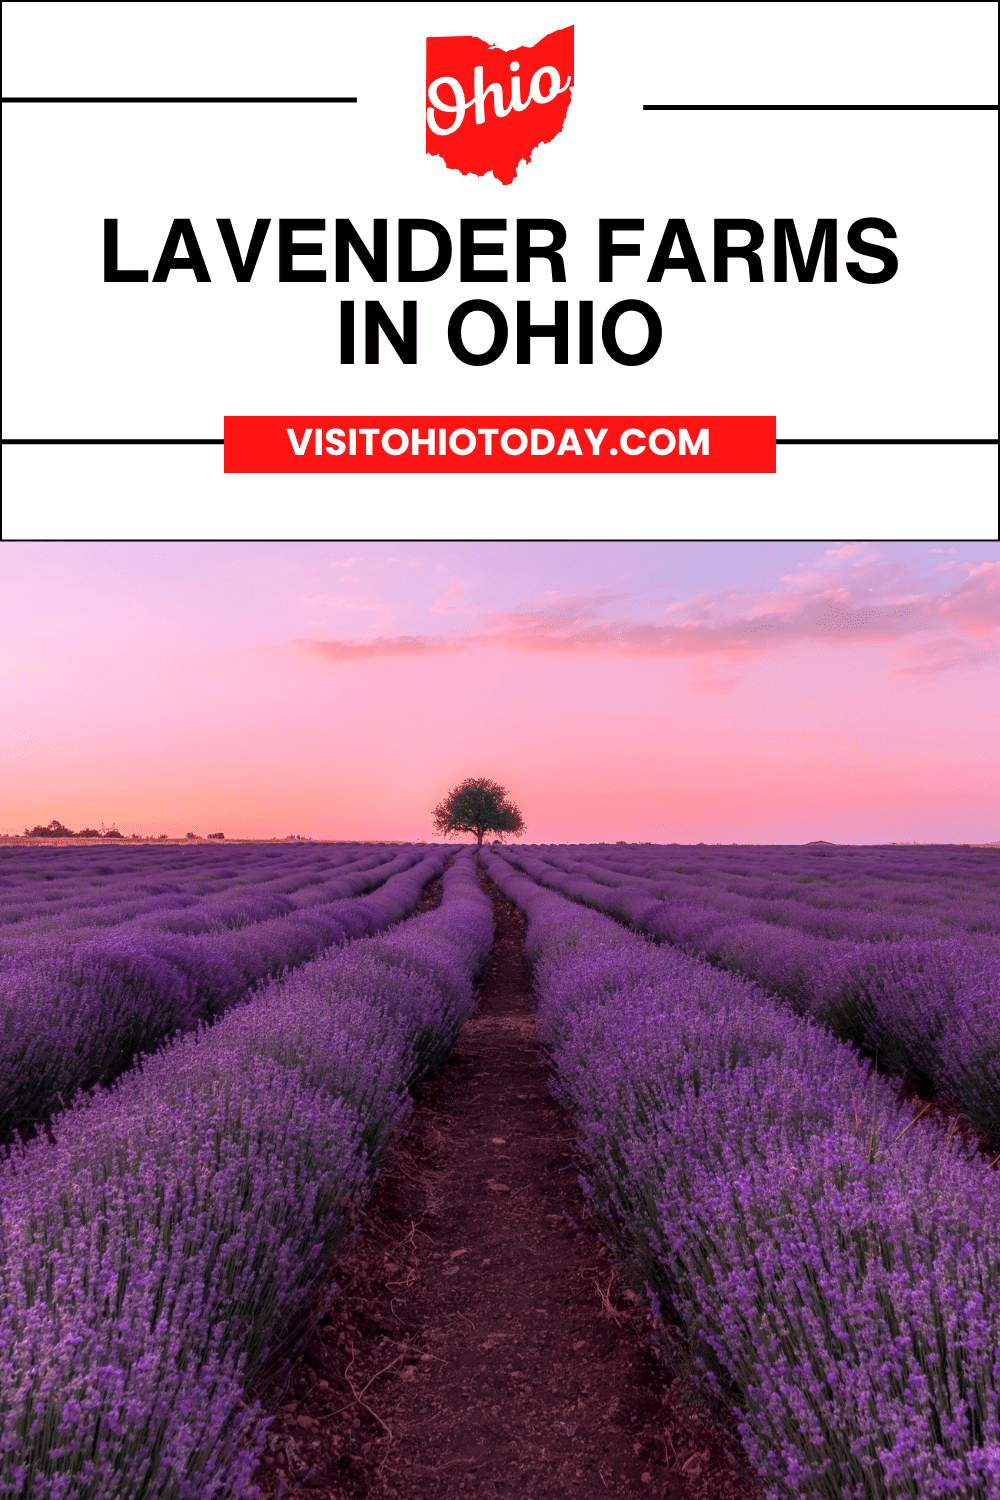 Walking through the Lavender Farms in Ohio will leave you with a feeling of peace as you inhale the intoxicatingly pure scent of lavender. You can enjoy this lovely activity in the summer, as lavender typically blooms mid-June through late August